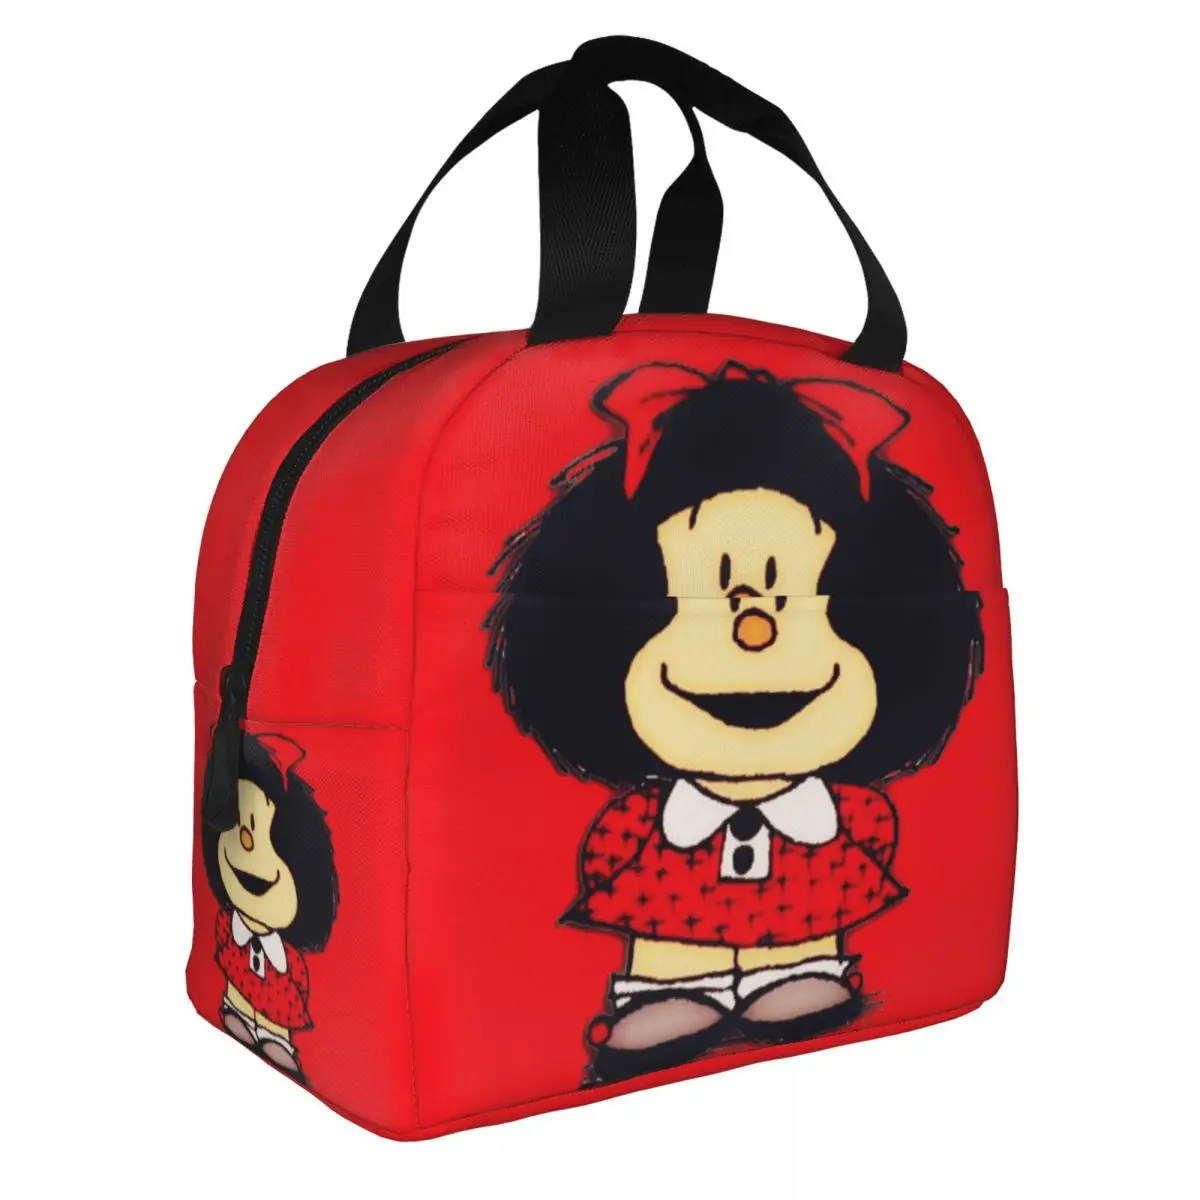 

Mafalda Insulated Lunch Bags Cooler Bag Meal Container Quino Argentina Cartoon High Capacity Tote Lunch Box Beach Travel